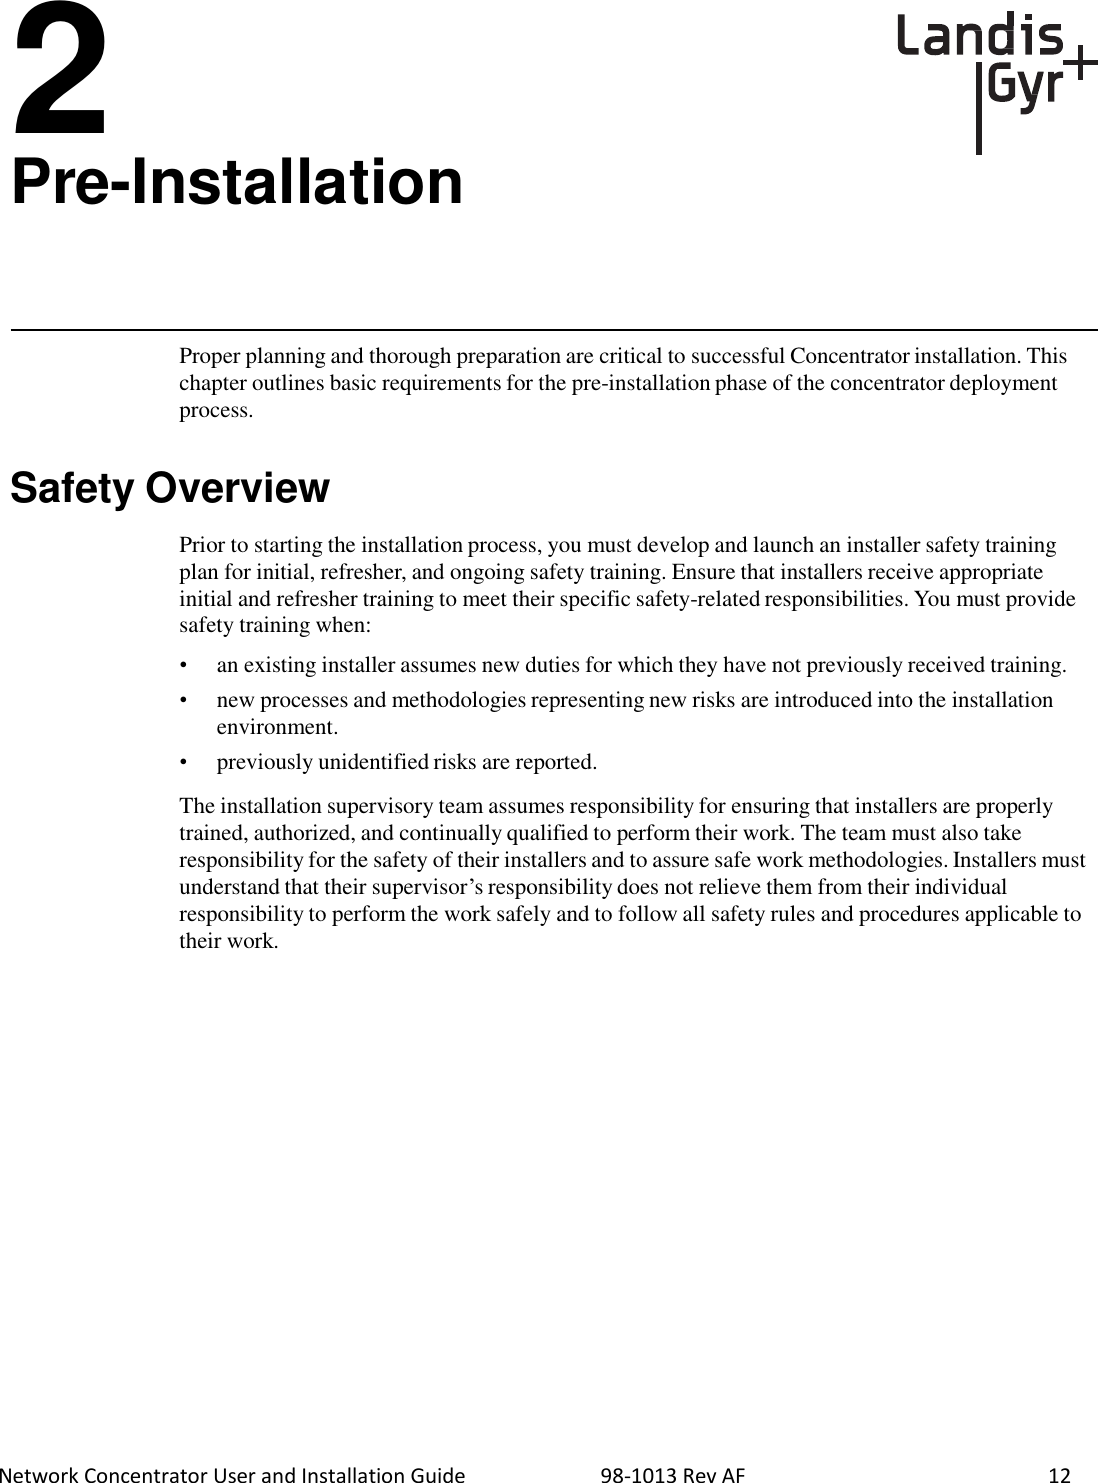  Network Concentrator User and Installation Guide                          98-1013 Rev AF    12  2 Pre-Installation       Proper planning and thorough preparation are critical to successful Concentrator installation. This chapter outlines basic requirements for the pre-installation phase of the concentrator deployment process.   Safety Overview  Prior to starting the installation process, you must develop and launch an installer safety training plan for initial, refresher, and ongoing safety training. Ensure that installers receive appropriate initial and refresher training to meet their specific safety-related responsibilities. You must provide safety training when:  • an existing installer assumes new duties for which they have not previously received training. •  new processes and methodologies representing new risks are introduced into the installation environment. •  previously unidentified risks are reported.  The installation supervisory team assumes responsibility for ensuring that installers are properly trained, authorized, and continually qualified to perform their work. The team must also take responsibility for the safety of their installers and to assure safe work methodologies. Installers must understand that their supervisor’s responsibility does not relieve them from their individual responsibility to perform the work safely and to follow all safety rules and procedures applicable to their work. 